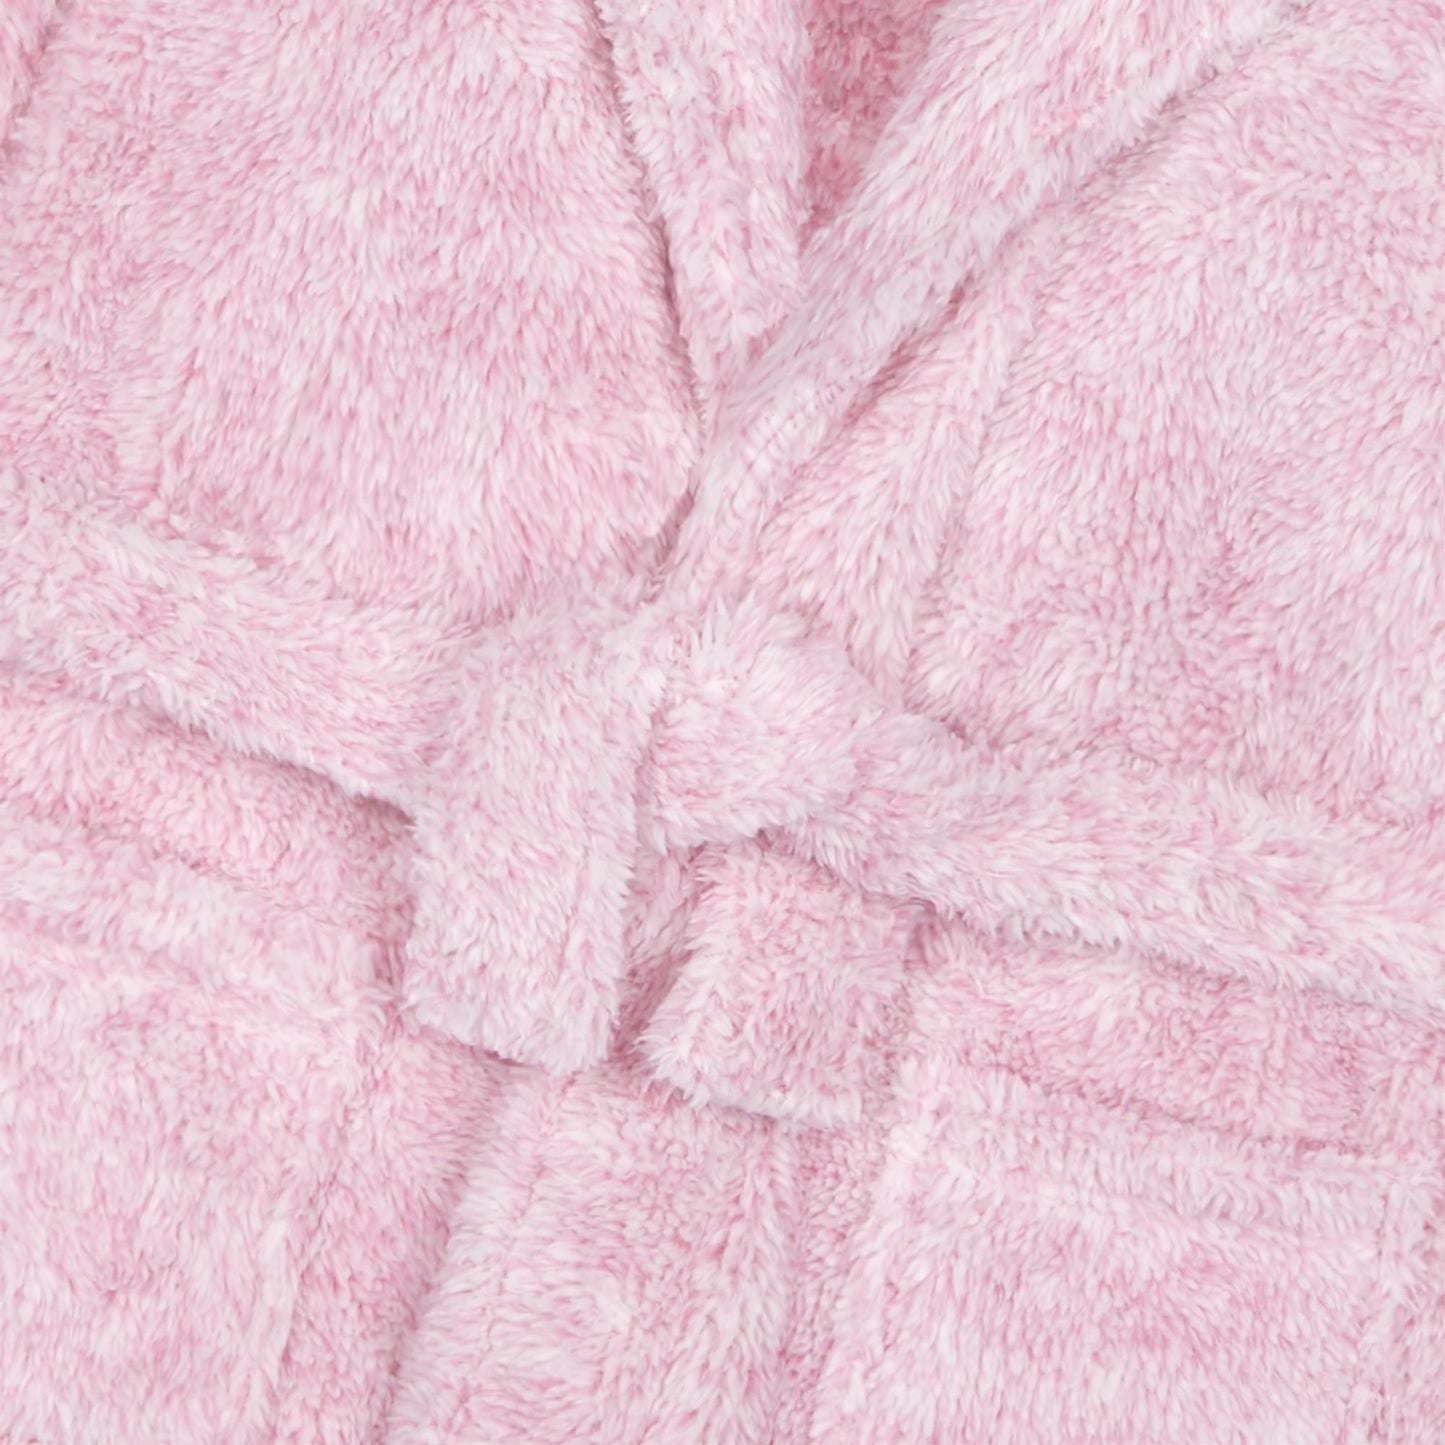 Childrens 2 Tone Snuggle Dressing Gown ~ 2-13 years